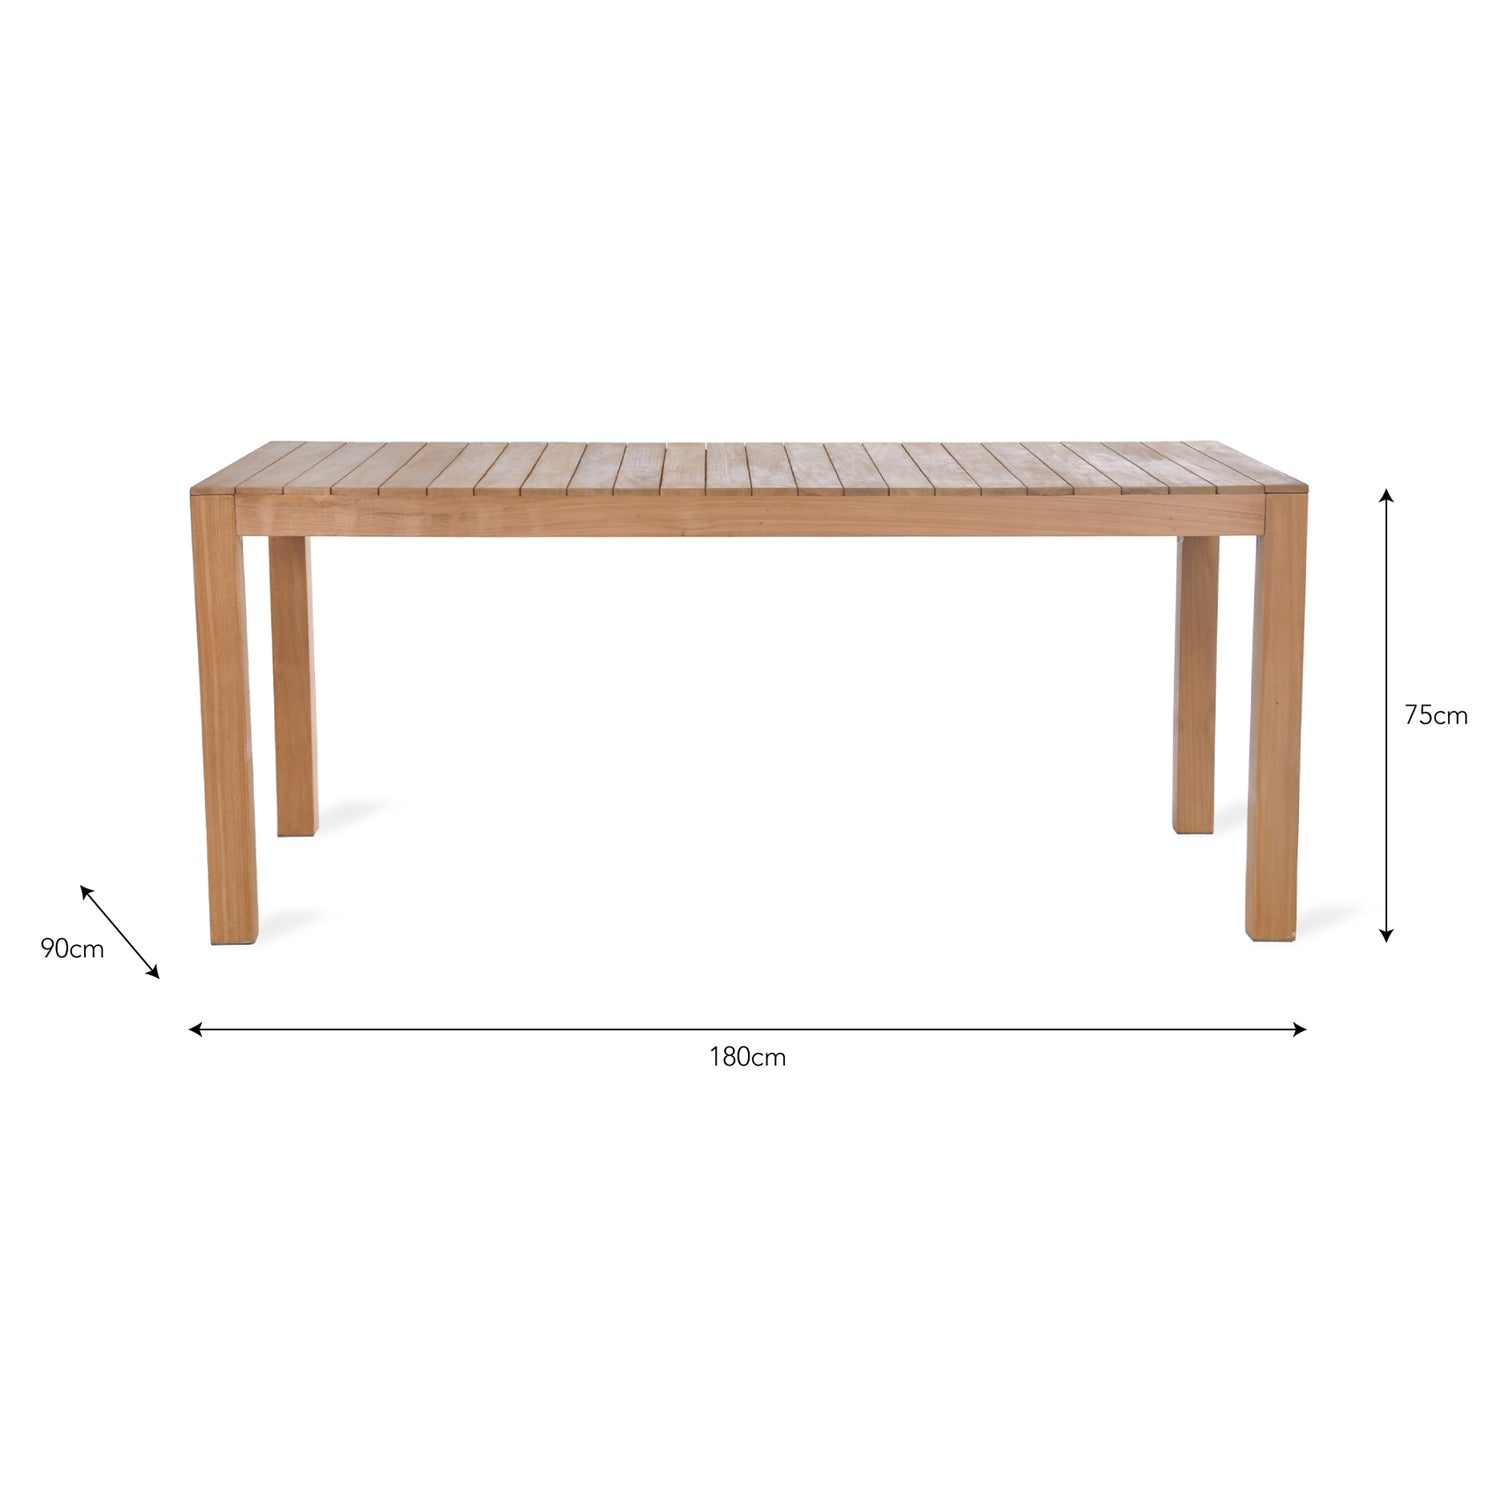 Harlyn Outdoor Dining Table Teak by Garden Trading